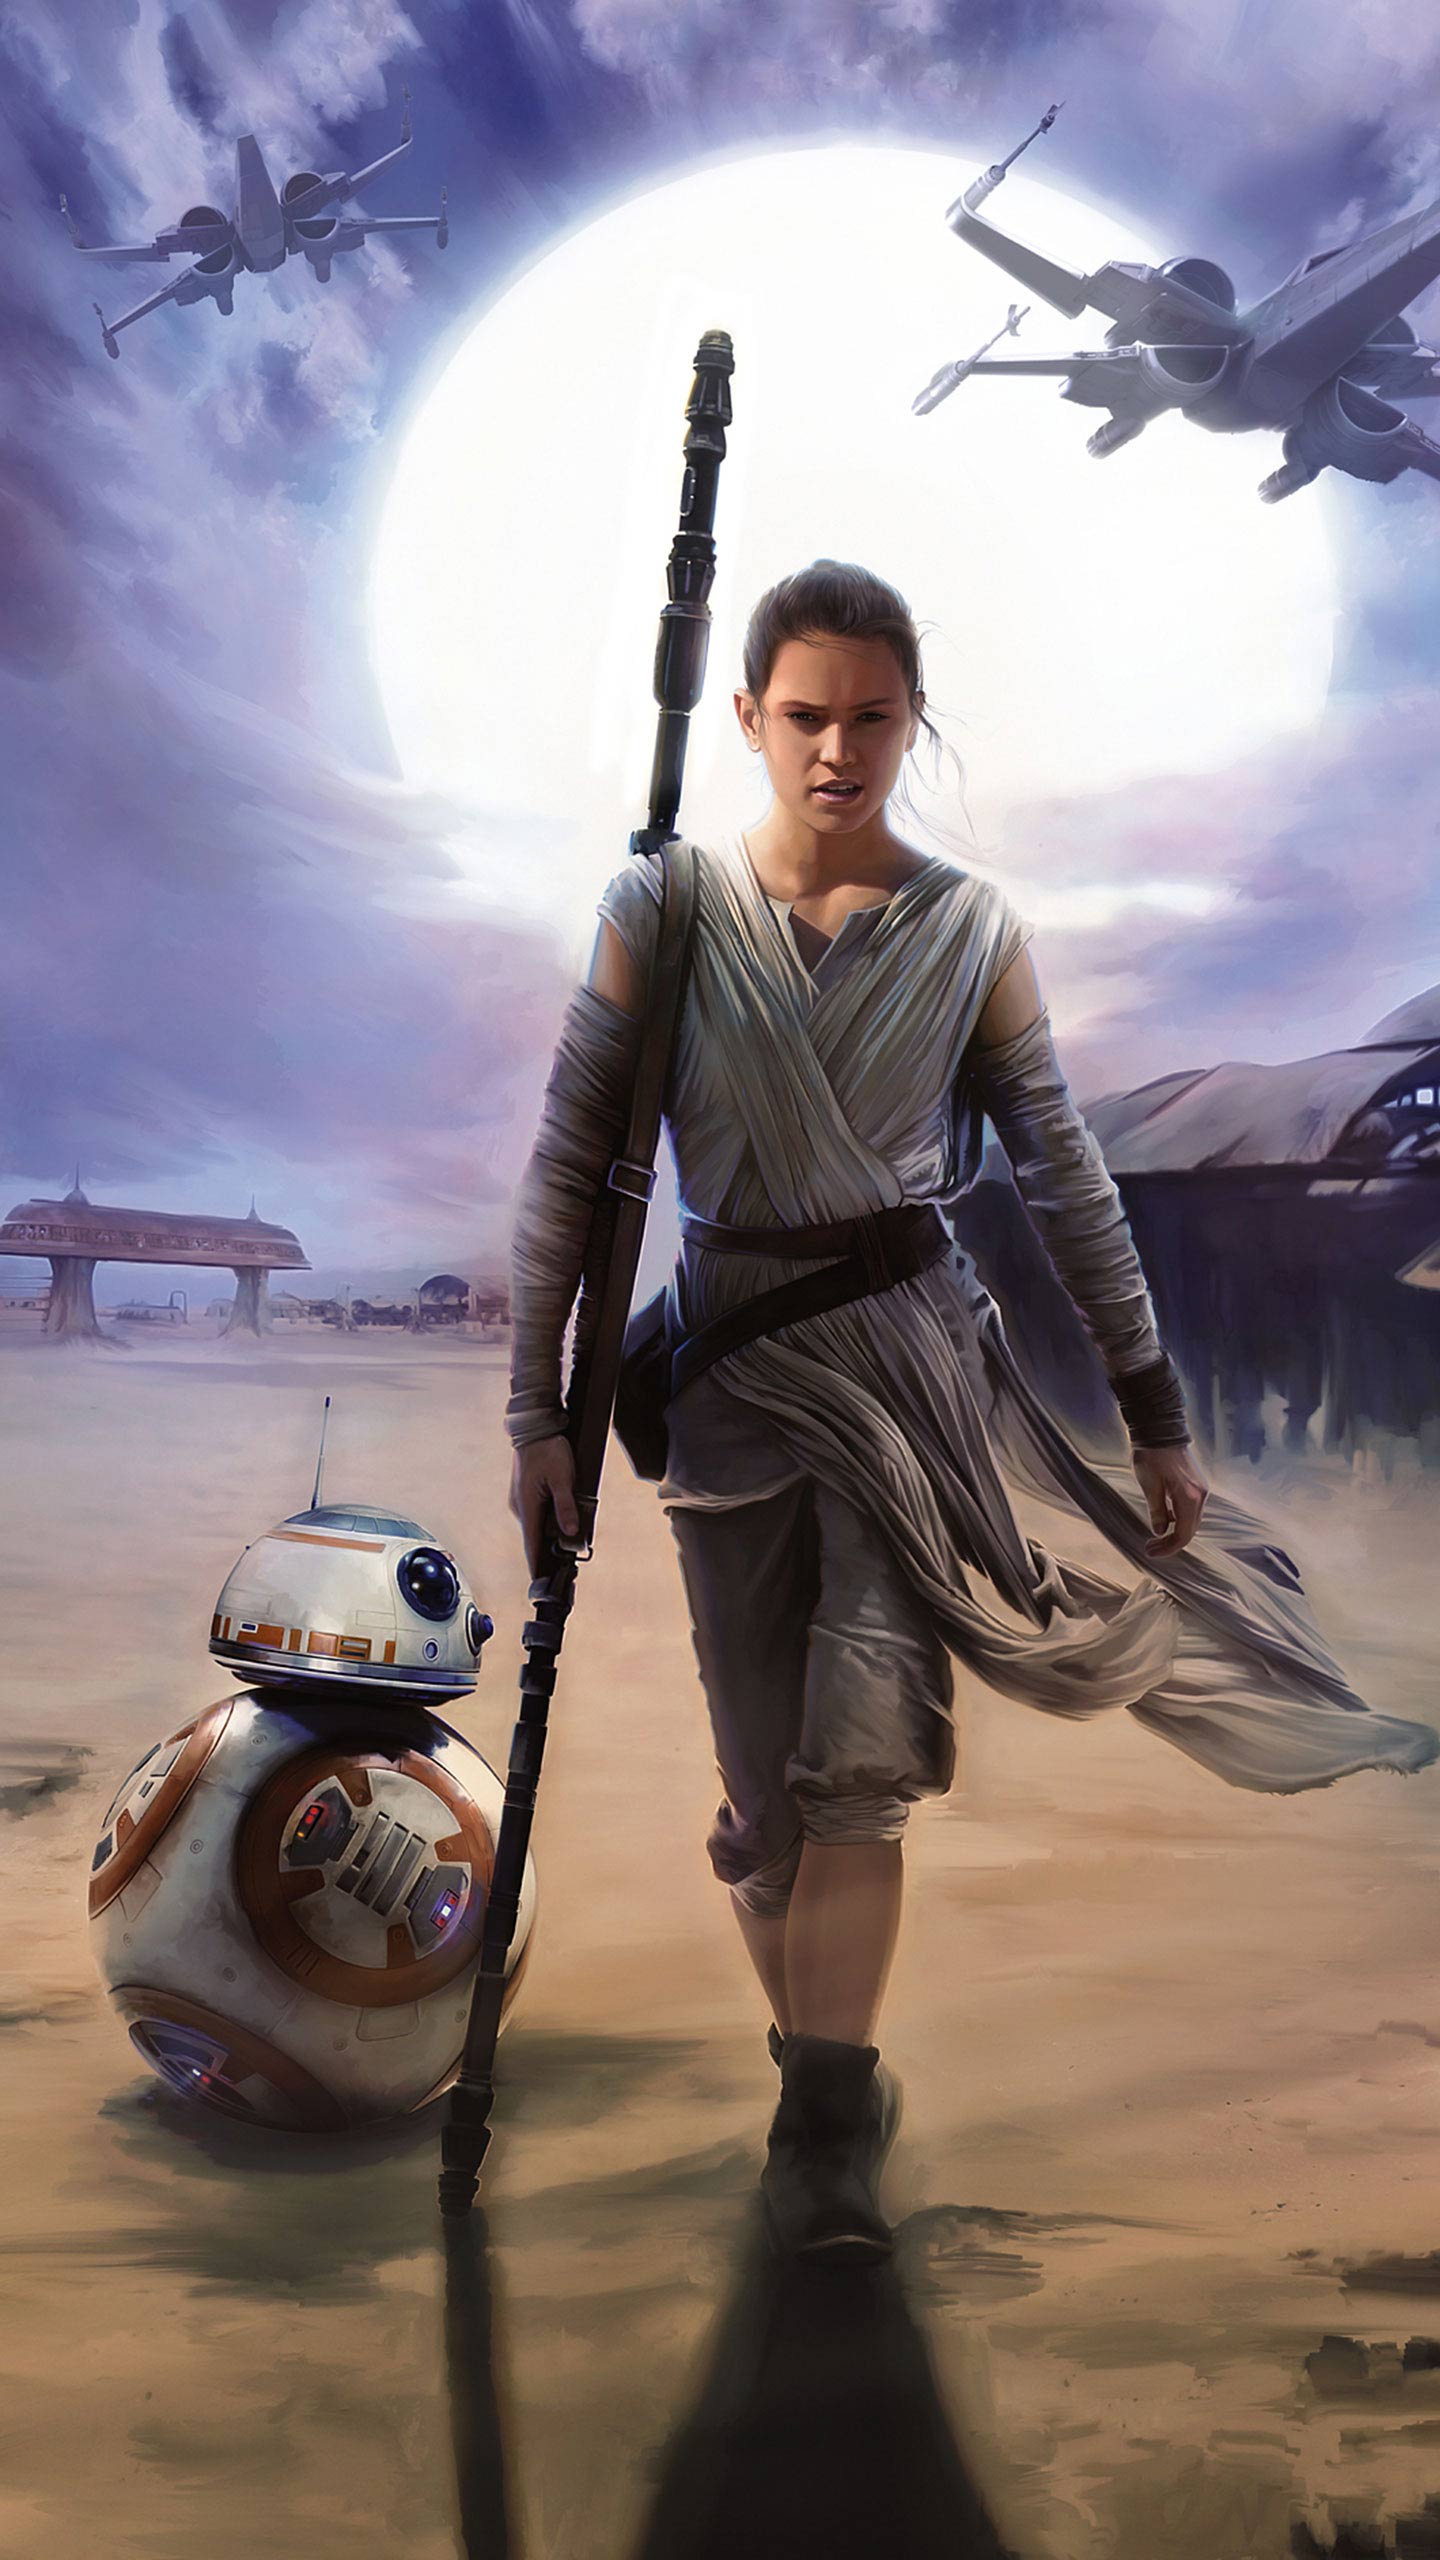 Star Wars The Force Awakens wallpapers for your iPhone 6s and other